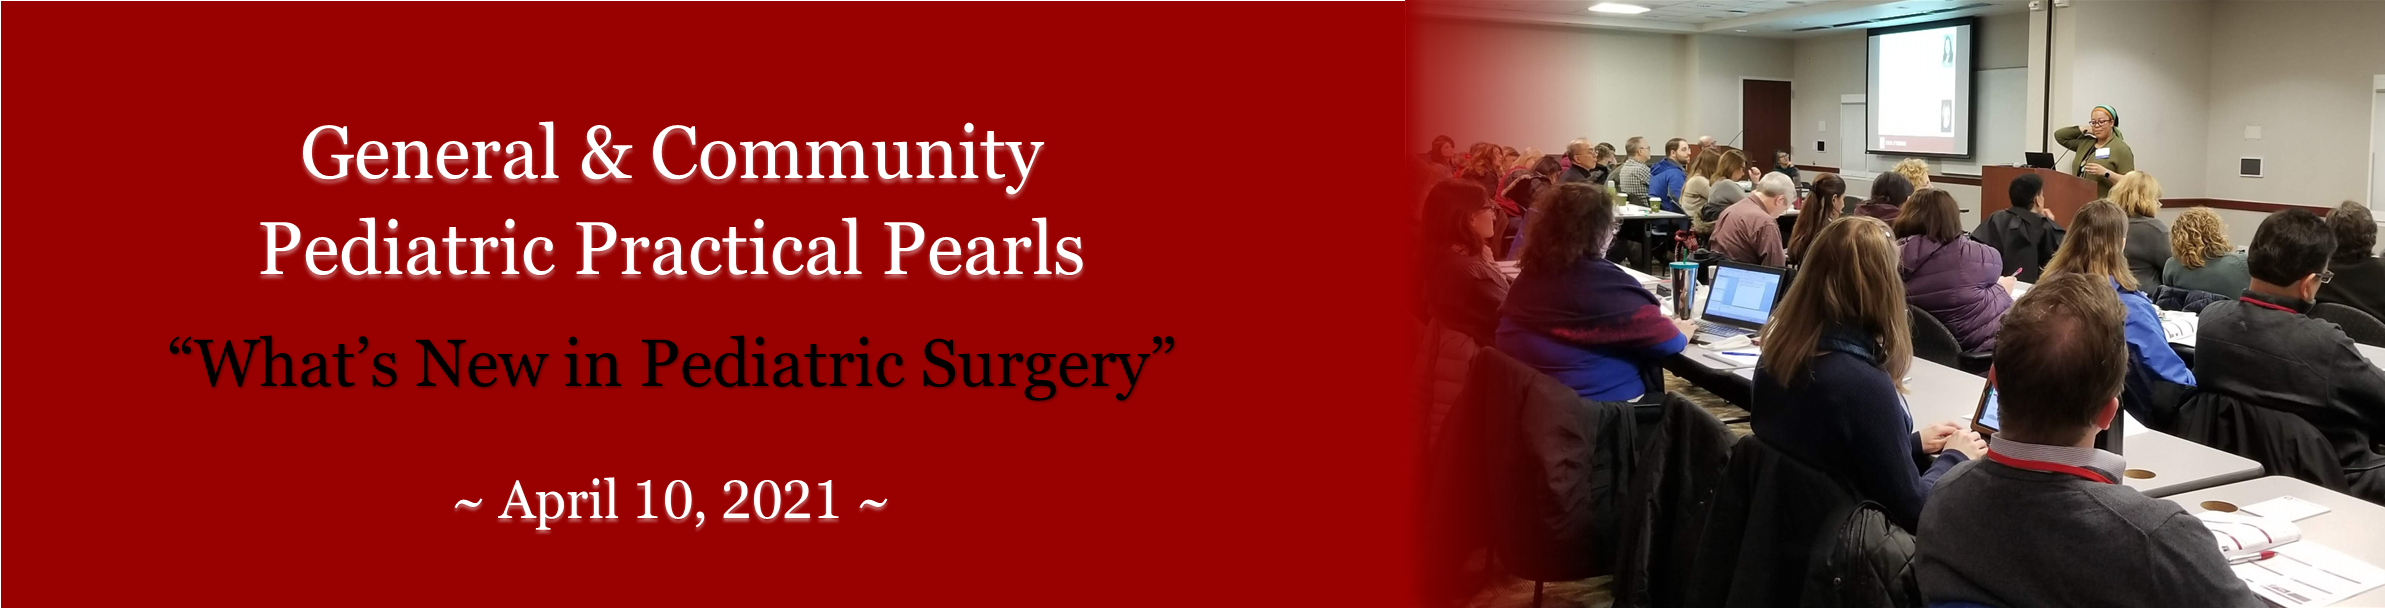 April 2021 Pediatric Practical Pearls: What's New in Pediatric Surgery? Banner